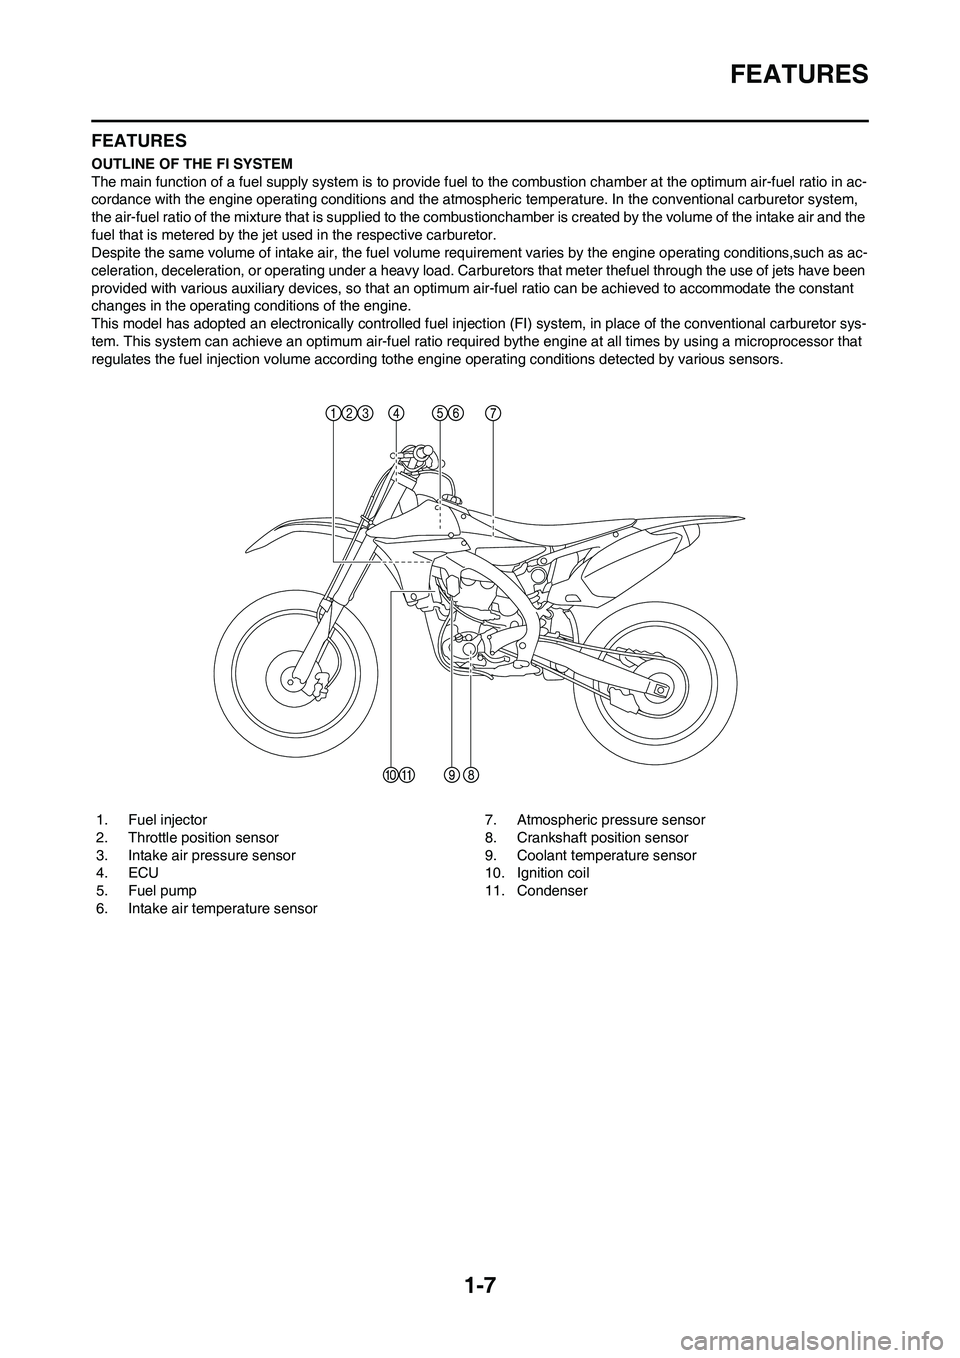 YAMAHA YZ450F 2010 User Guide 1-7
FEATURES
FEATURES
OUTLINE OF THE FI SYSTEM
The main function of a fuel supply system is to provide fuel to the combustion chamber at the optimum air-fuel ratio in ac-
cordance with the engine oper